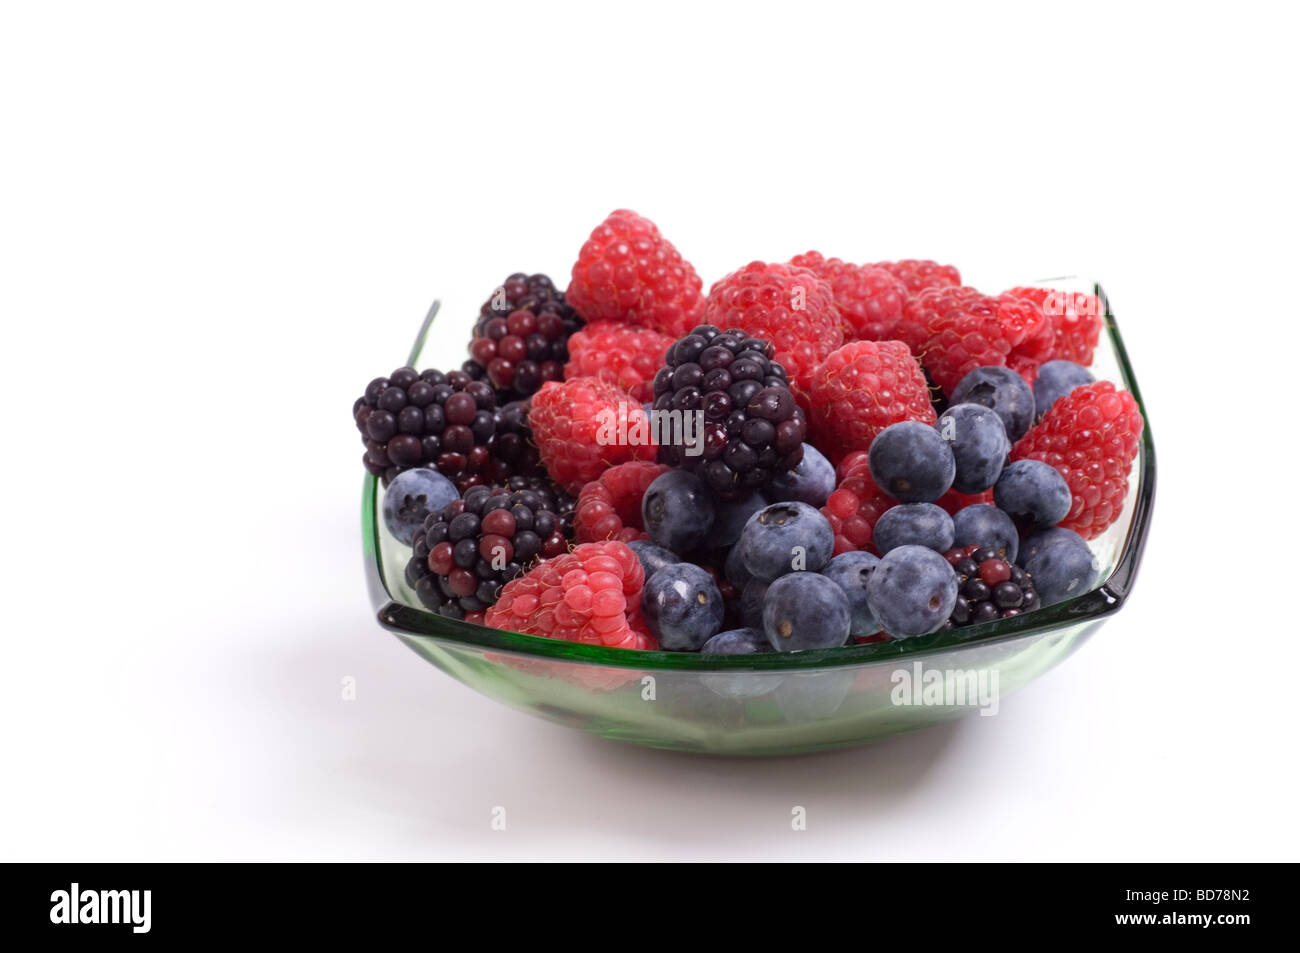 Dish of mixed berries on a white background Stock Photo